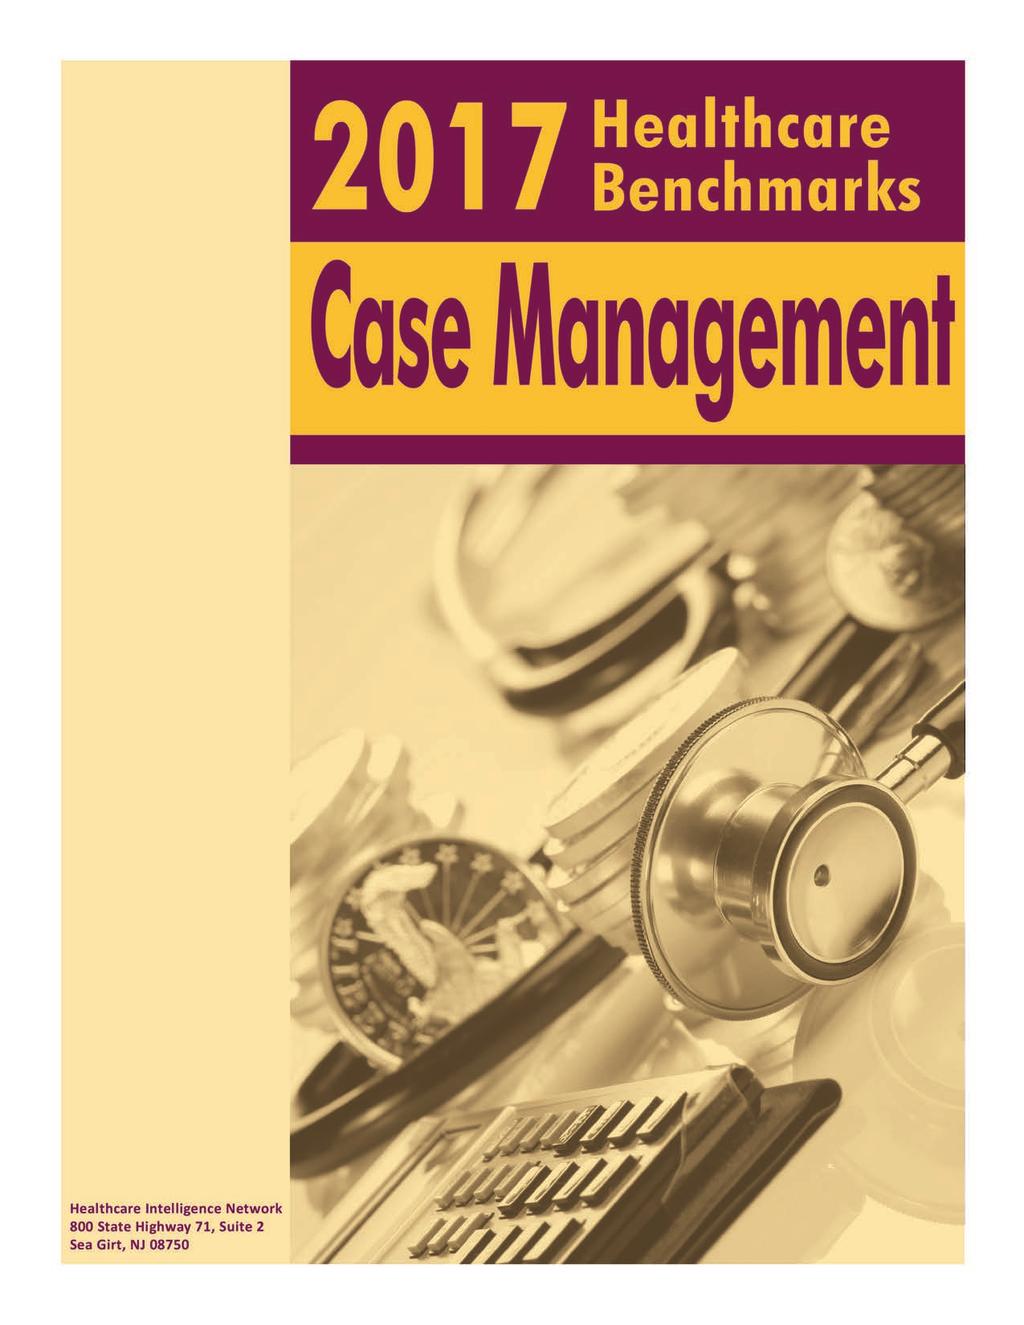 Note: This is an authorized excerpt from 2017 Healthcare Benchmarks: Case Management.